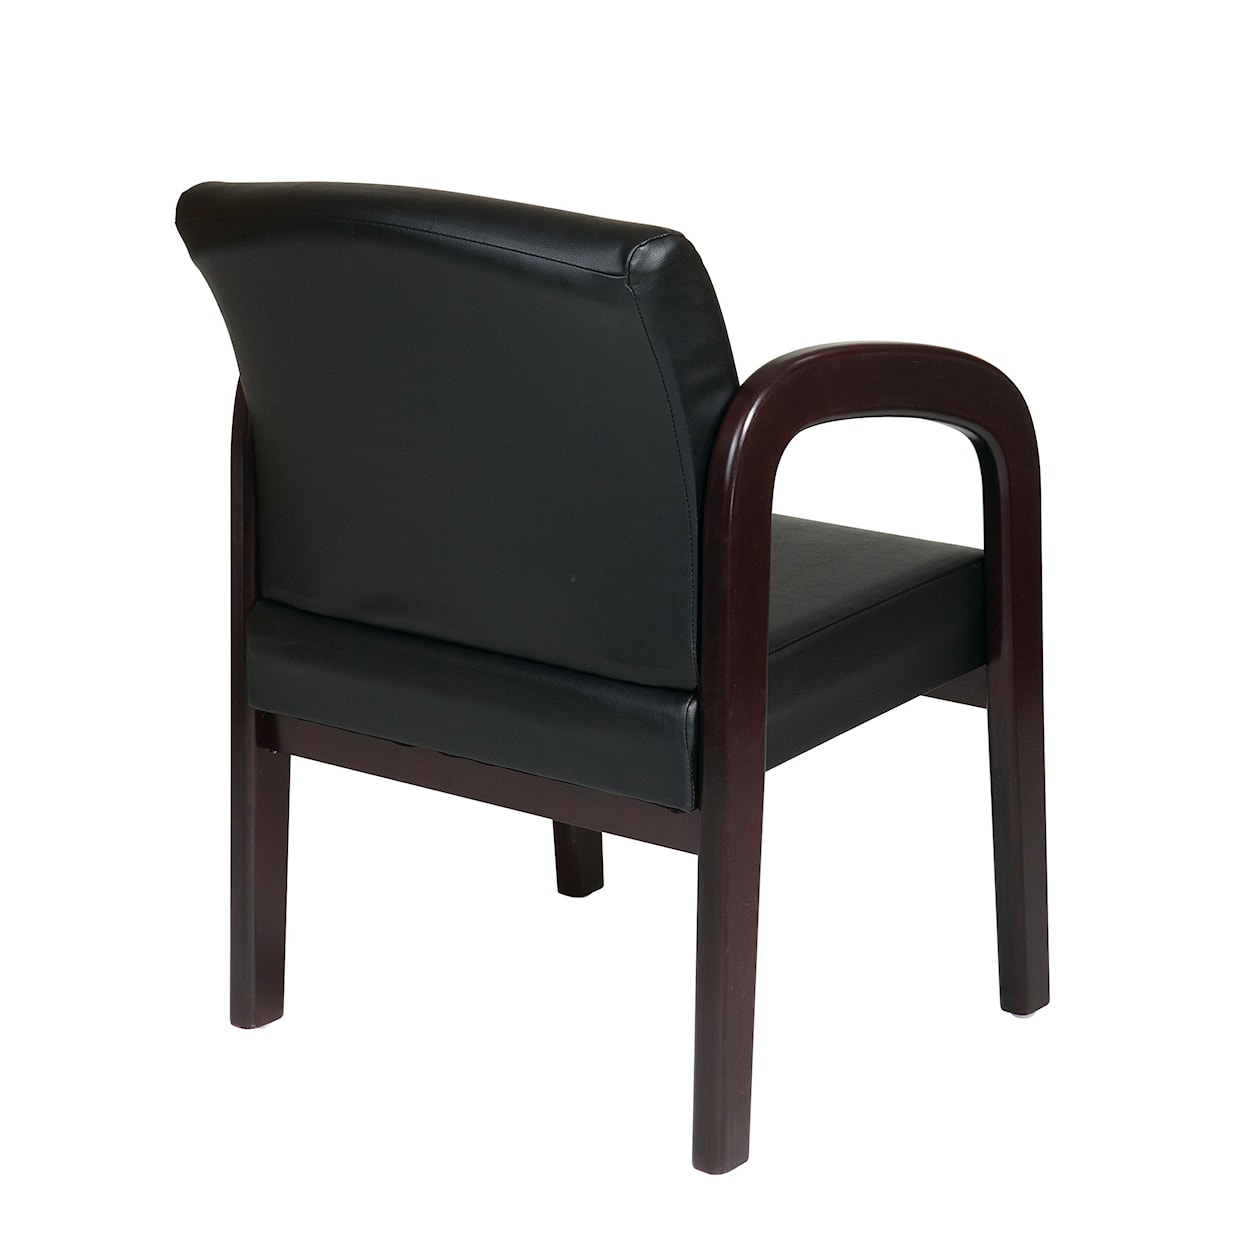 Office Star WD Collection Chair